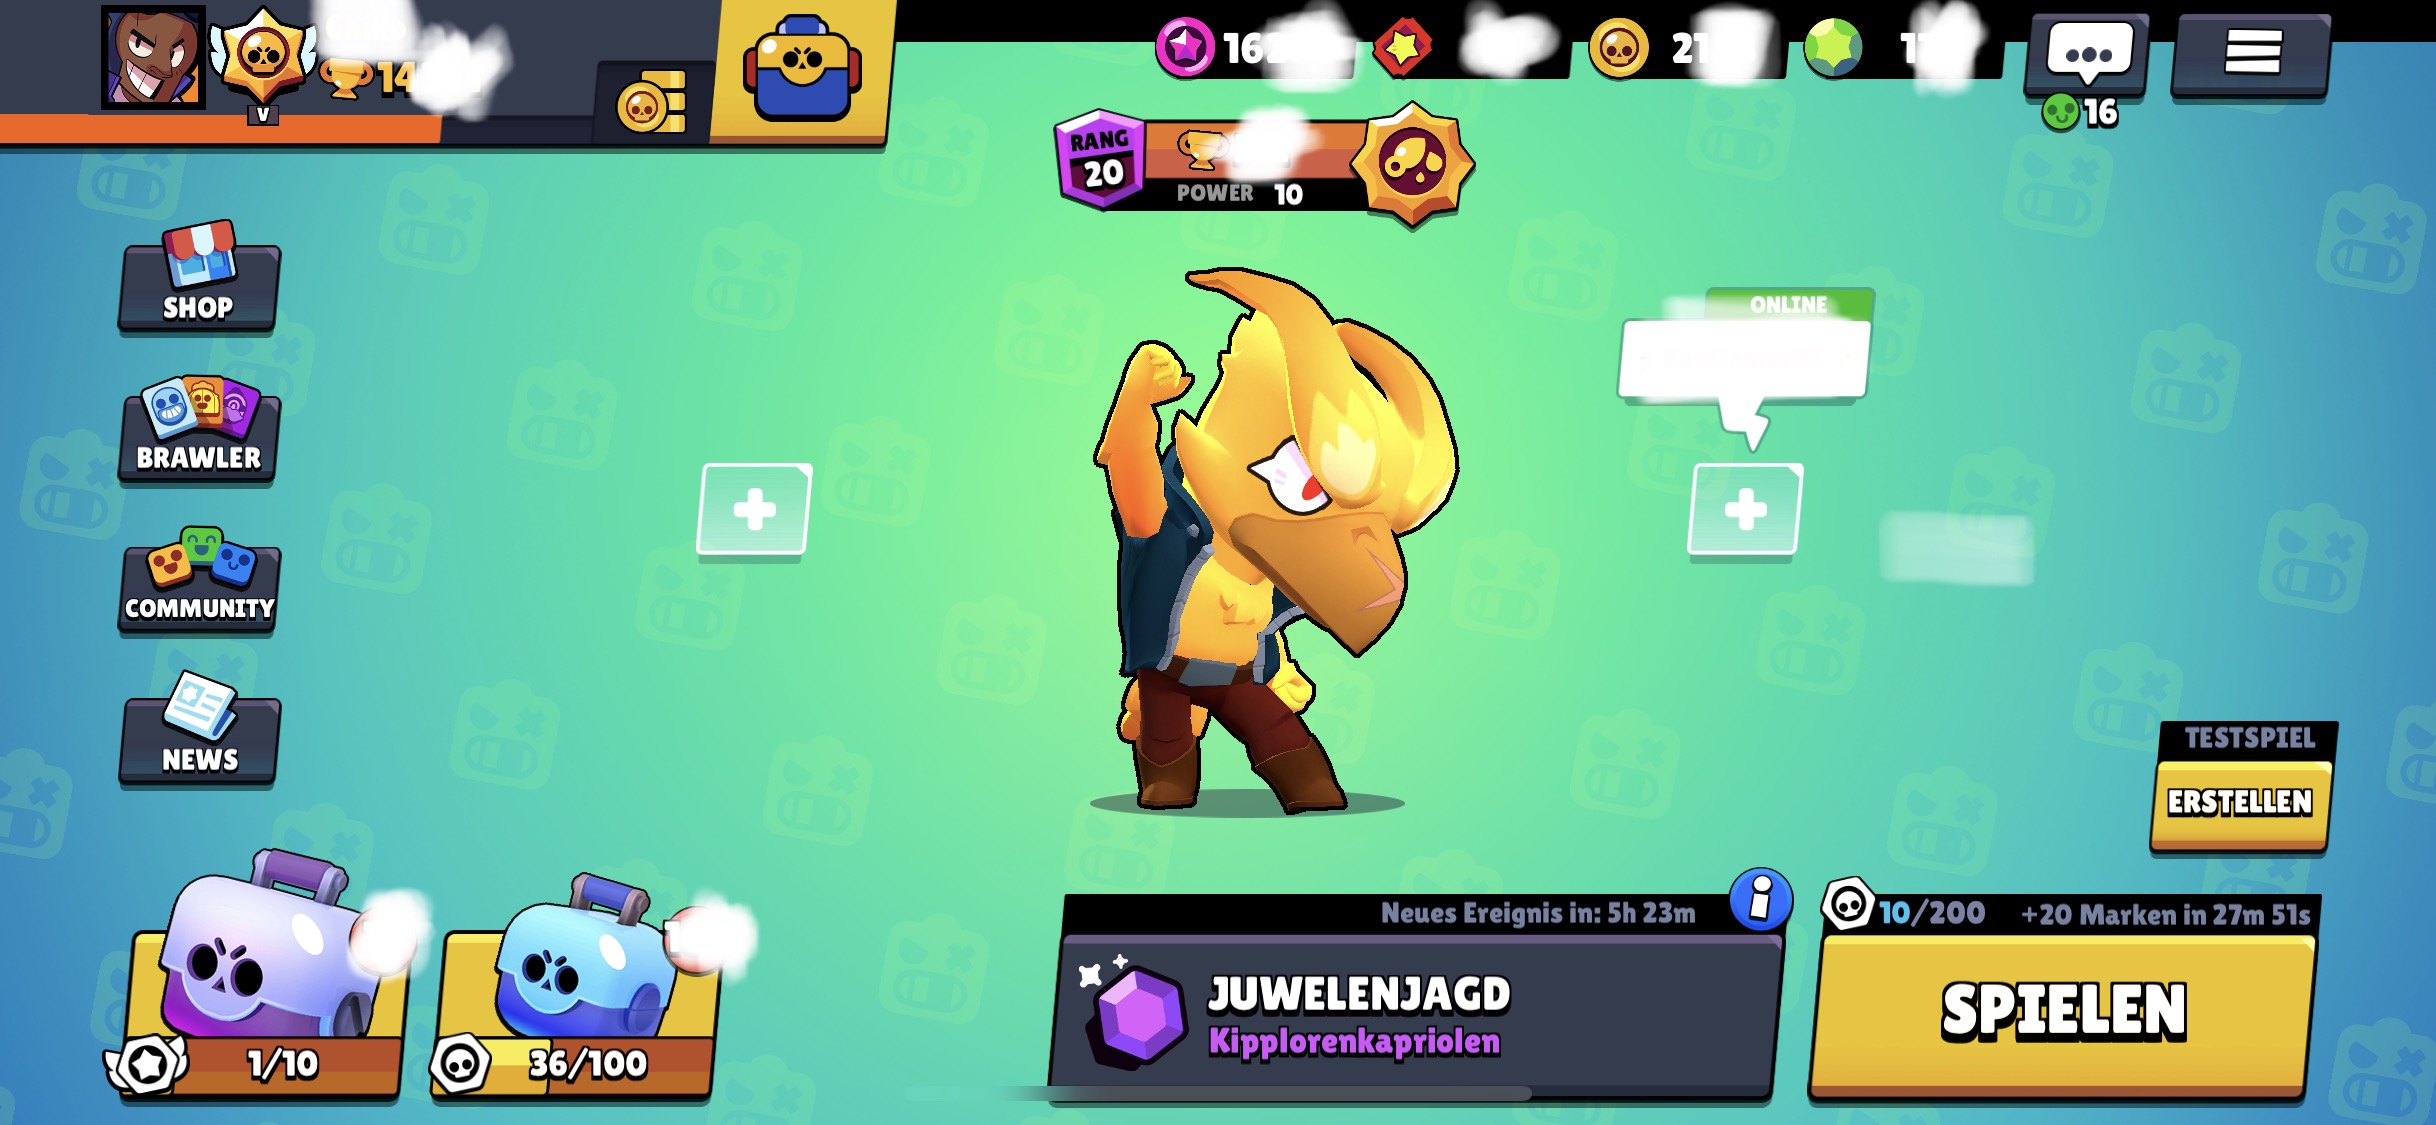 Brawl Stars Max Account With 14800 Trophies And Over 16000 Starpoints Epicnpc Marketplace - brawl stars star marken